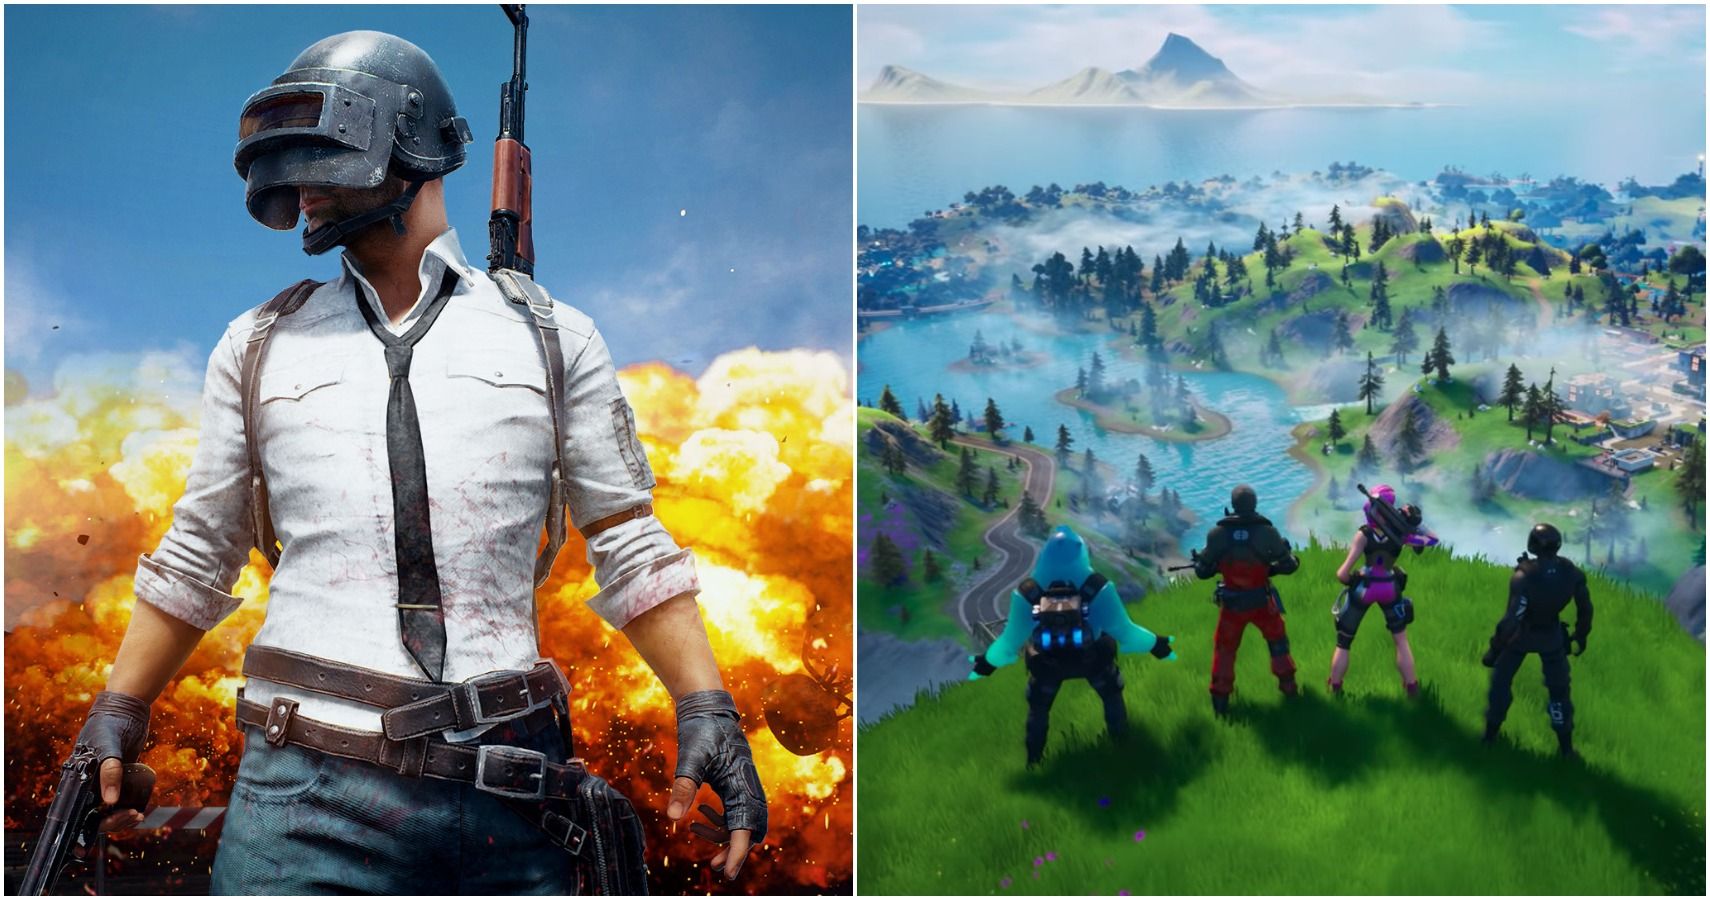 Fortnite vs PUBG - Which One Is The Best Battle Royale Game? [ULTIMATE